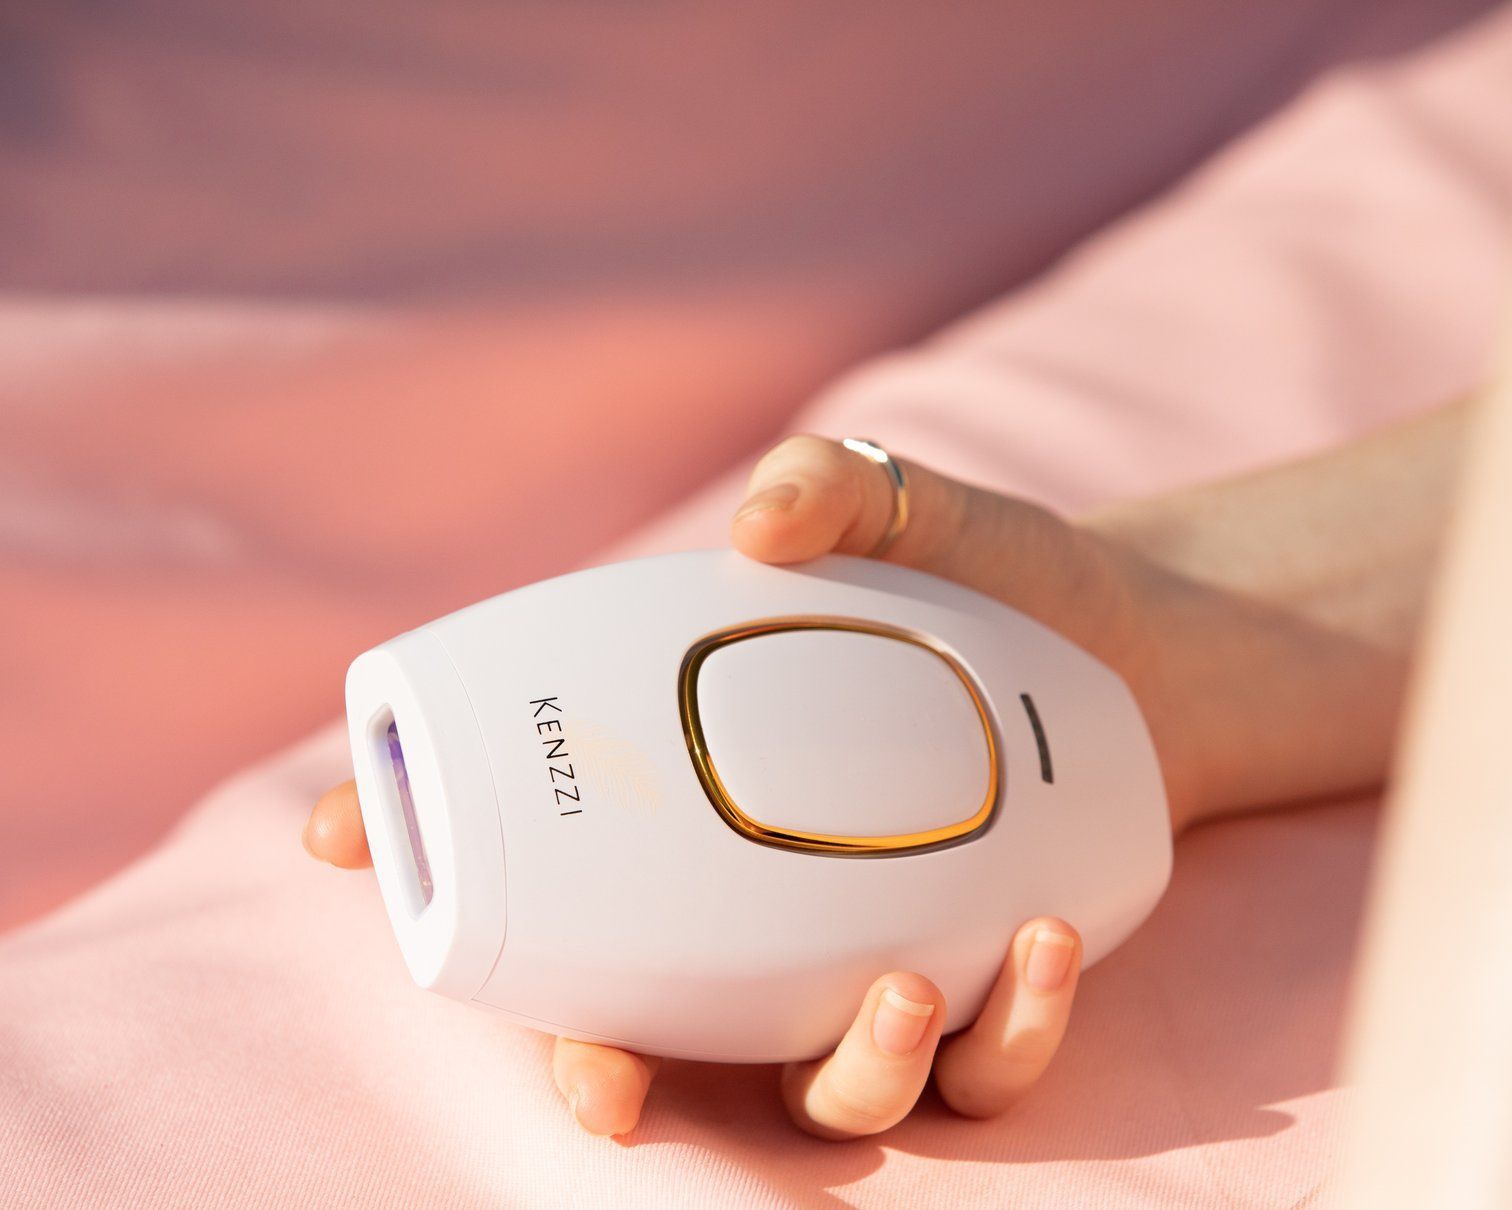 Kenzzi laser hair removal system